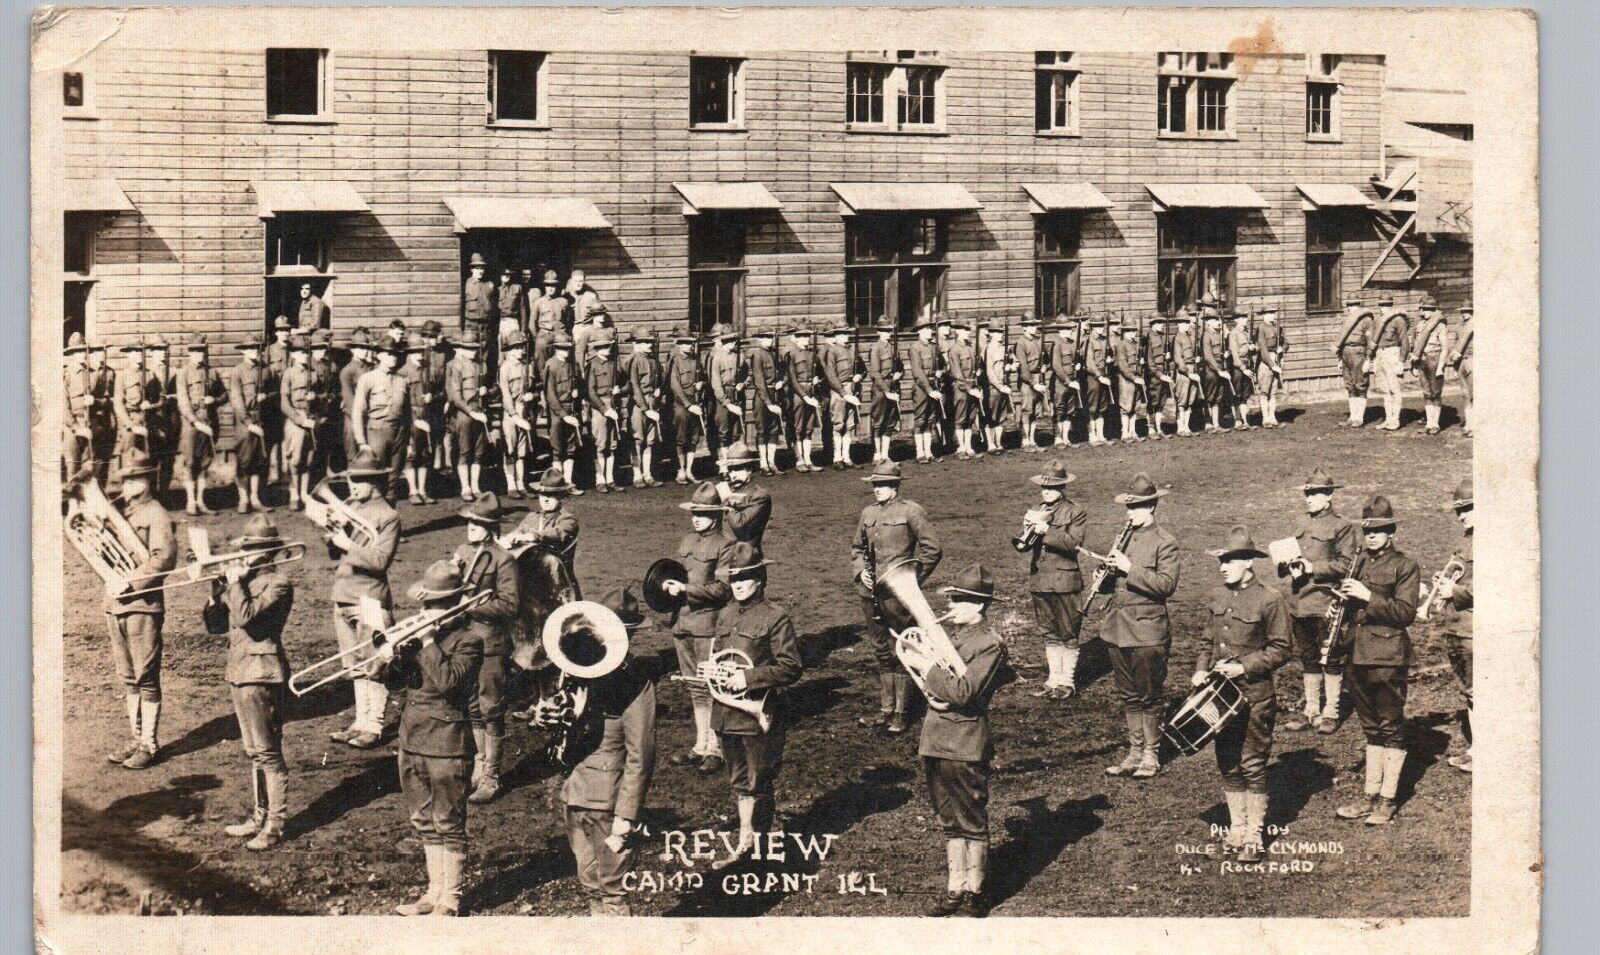 TROOP REVIEW camp grant il real photo postcard rppc soldiers marching band